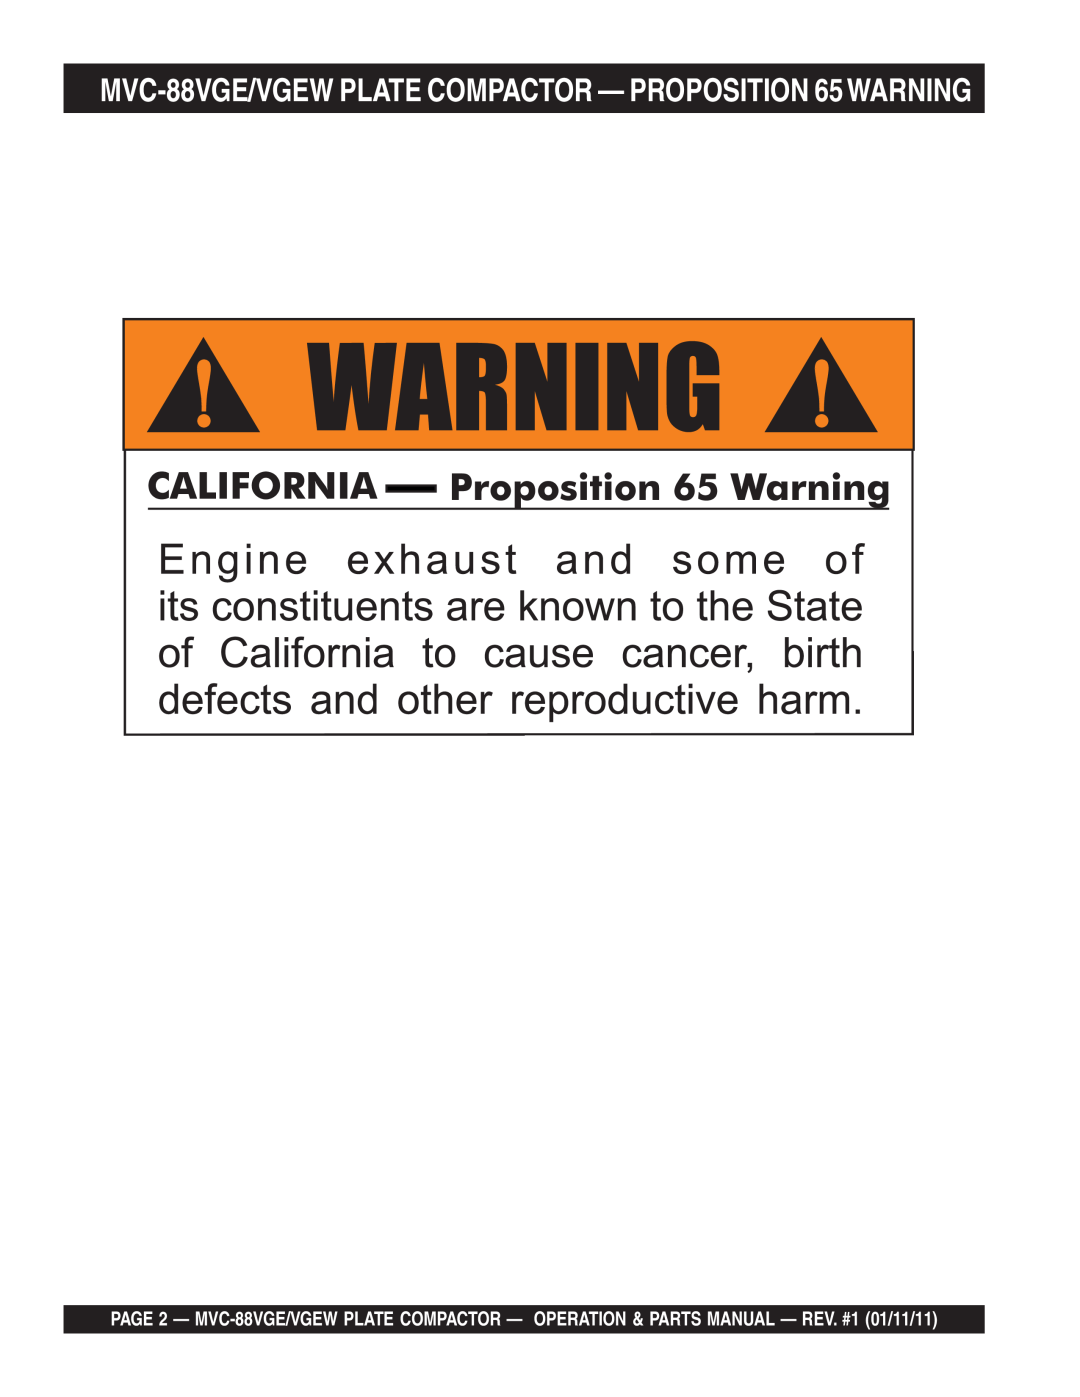 Multiquip manual MVC-88VGE/VGEW PLATE COMPACTOR - PROPOSITION 65WARNING 